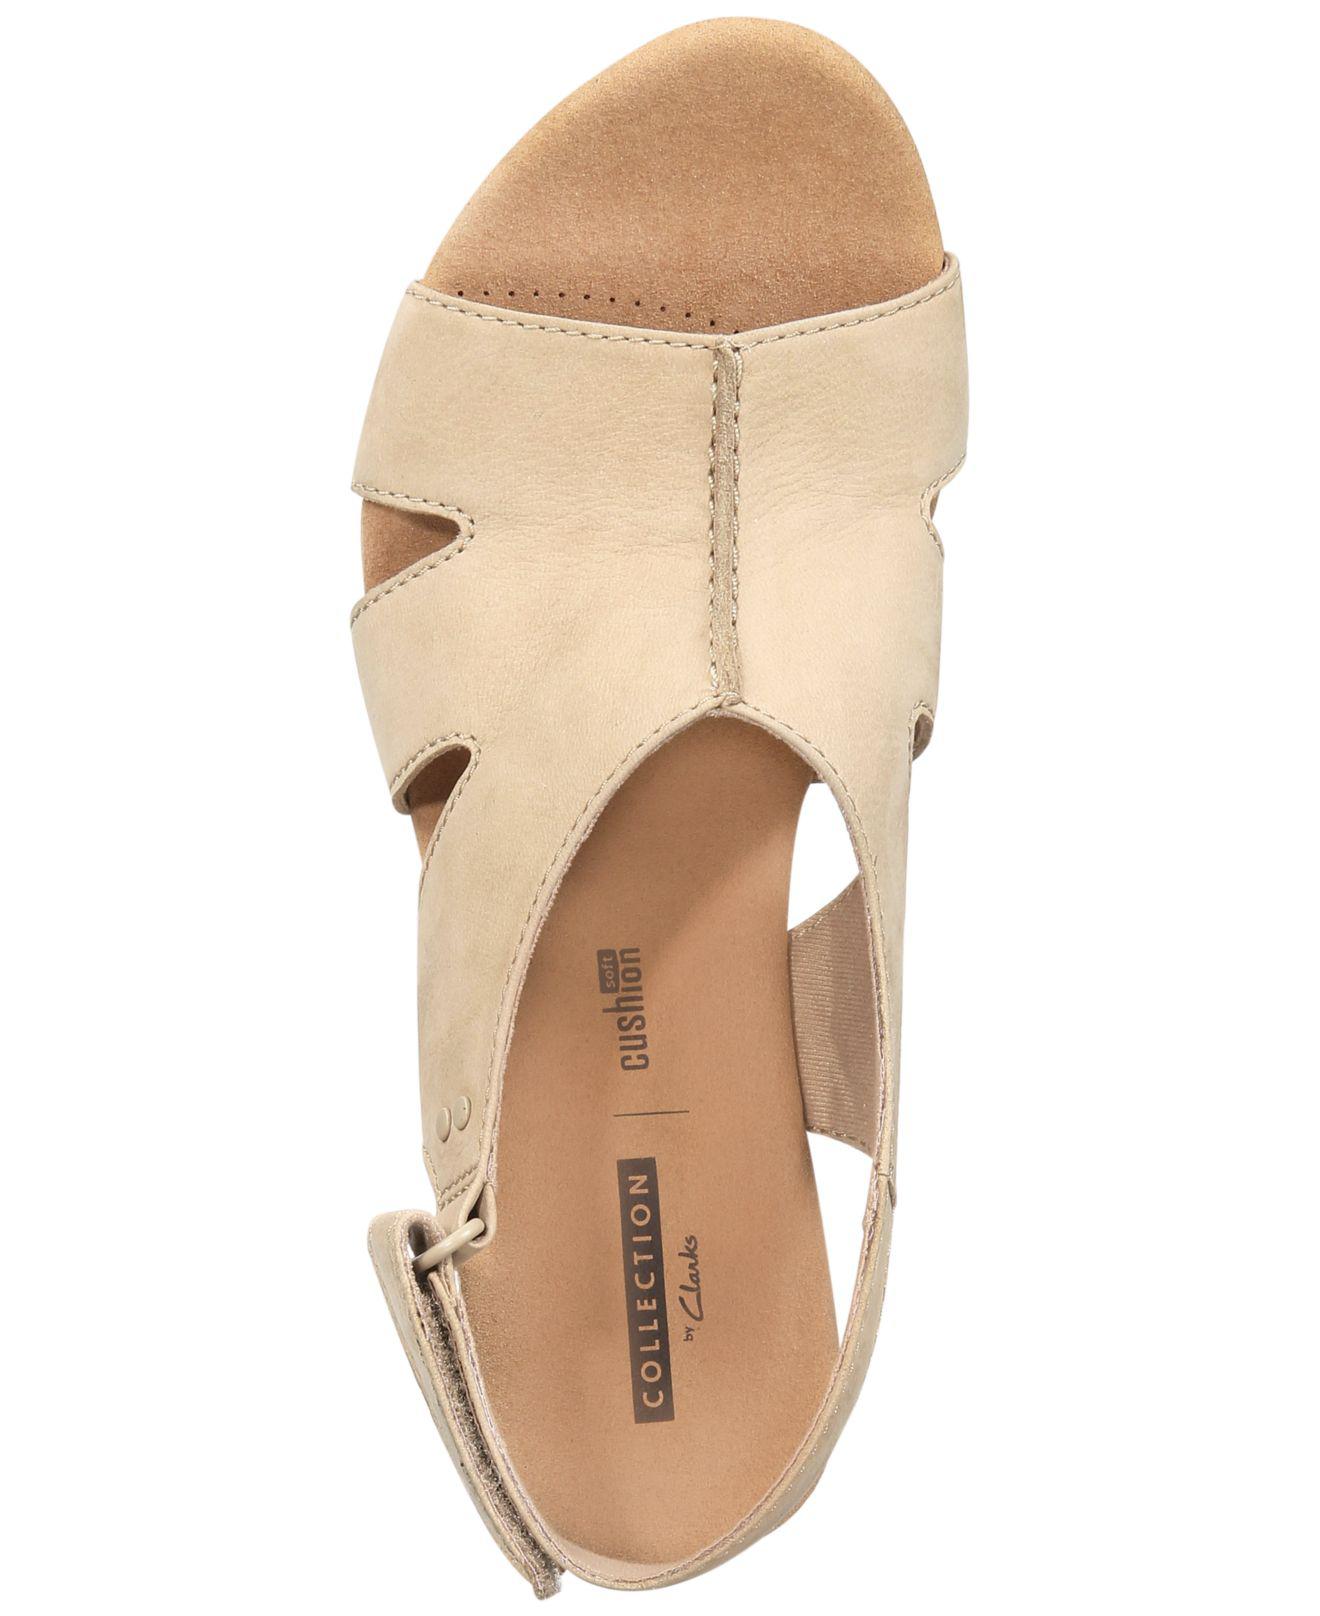 Clarks Annadel Sandals in Natural | Lyst